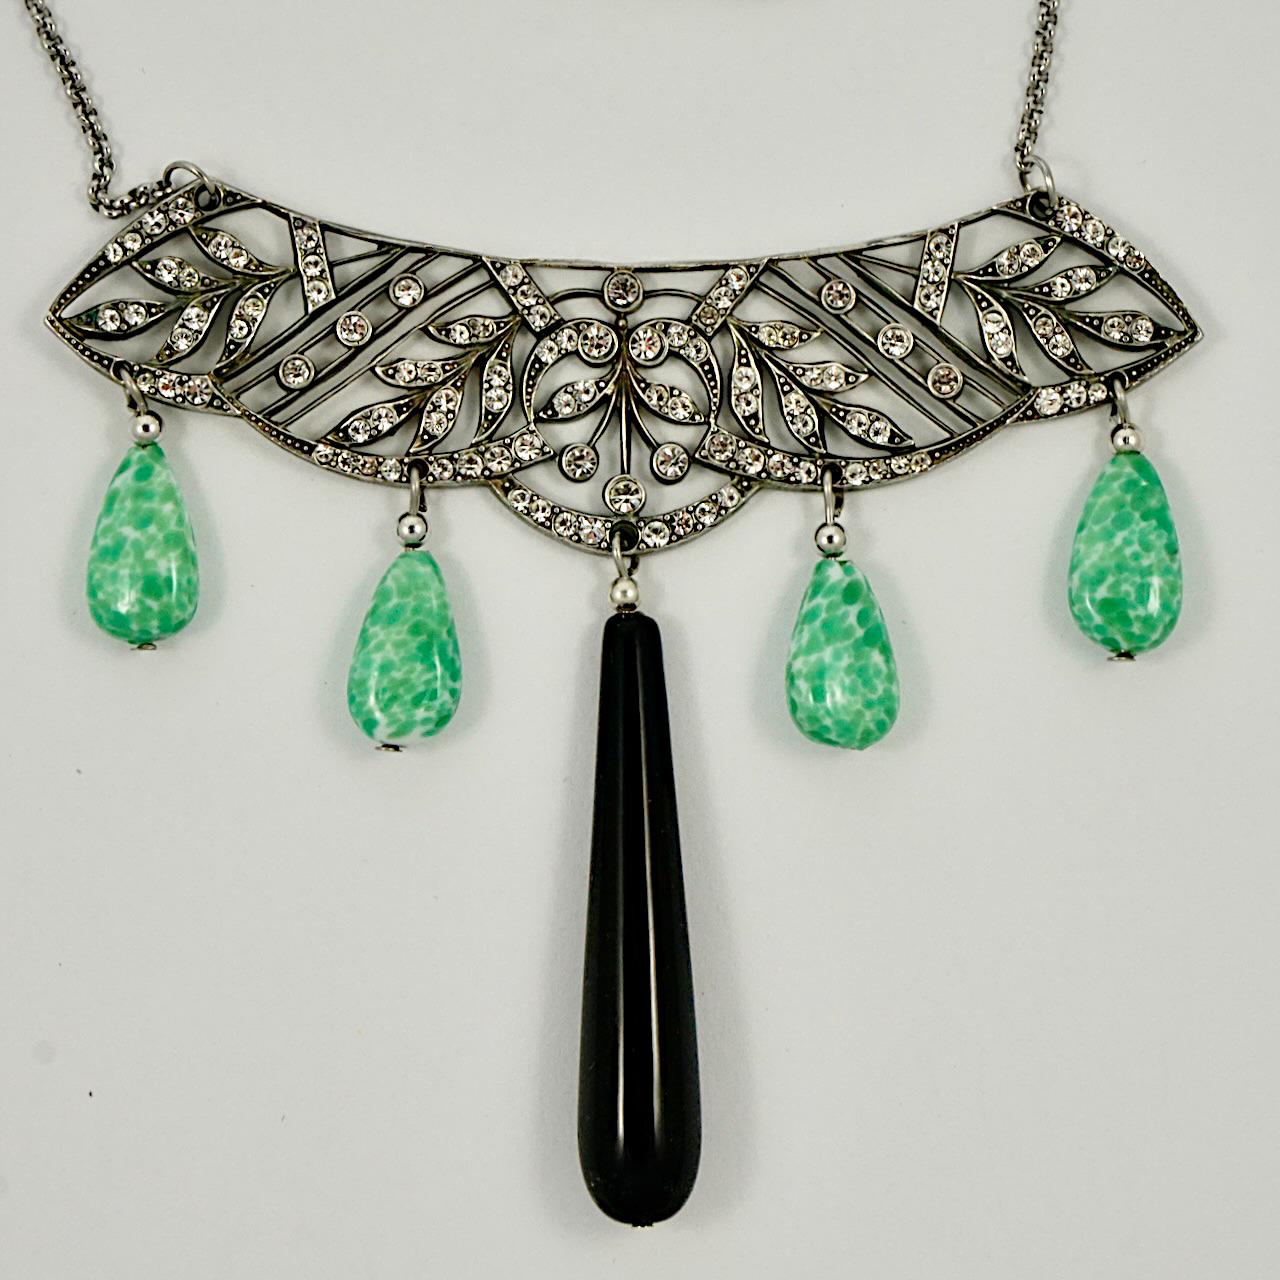 Women's or Men's Reworked Tiara Crystal Necklace with Peking Black Glass Drops circa 1930s  For Sale